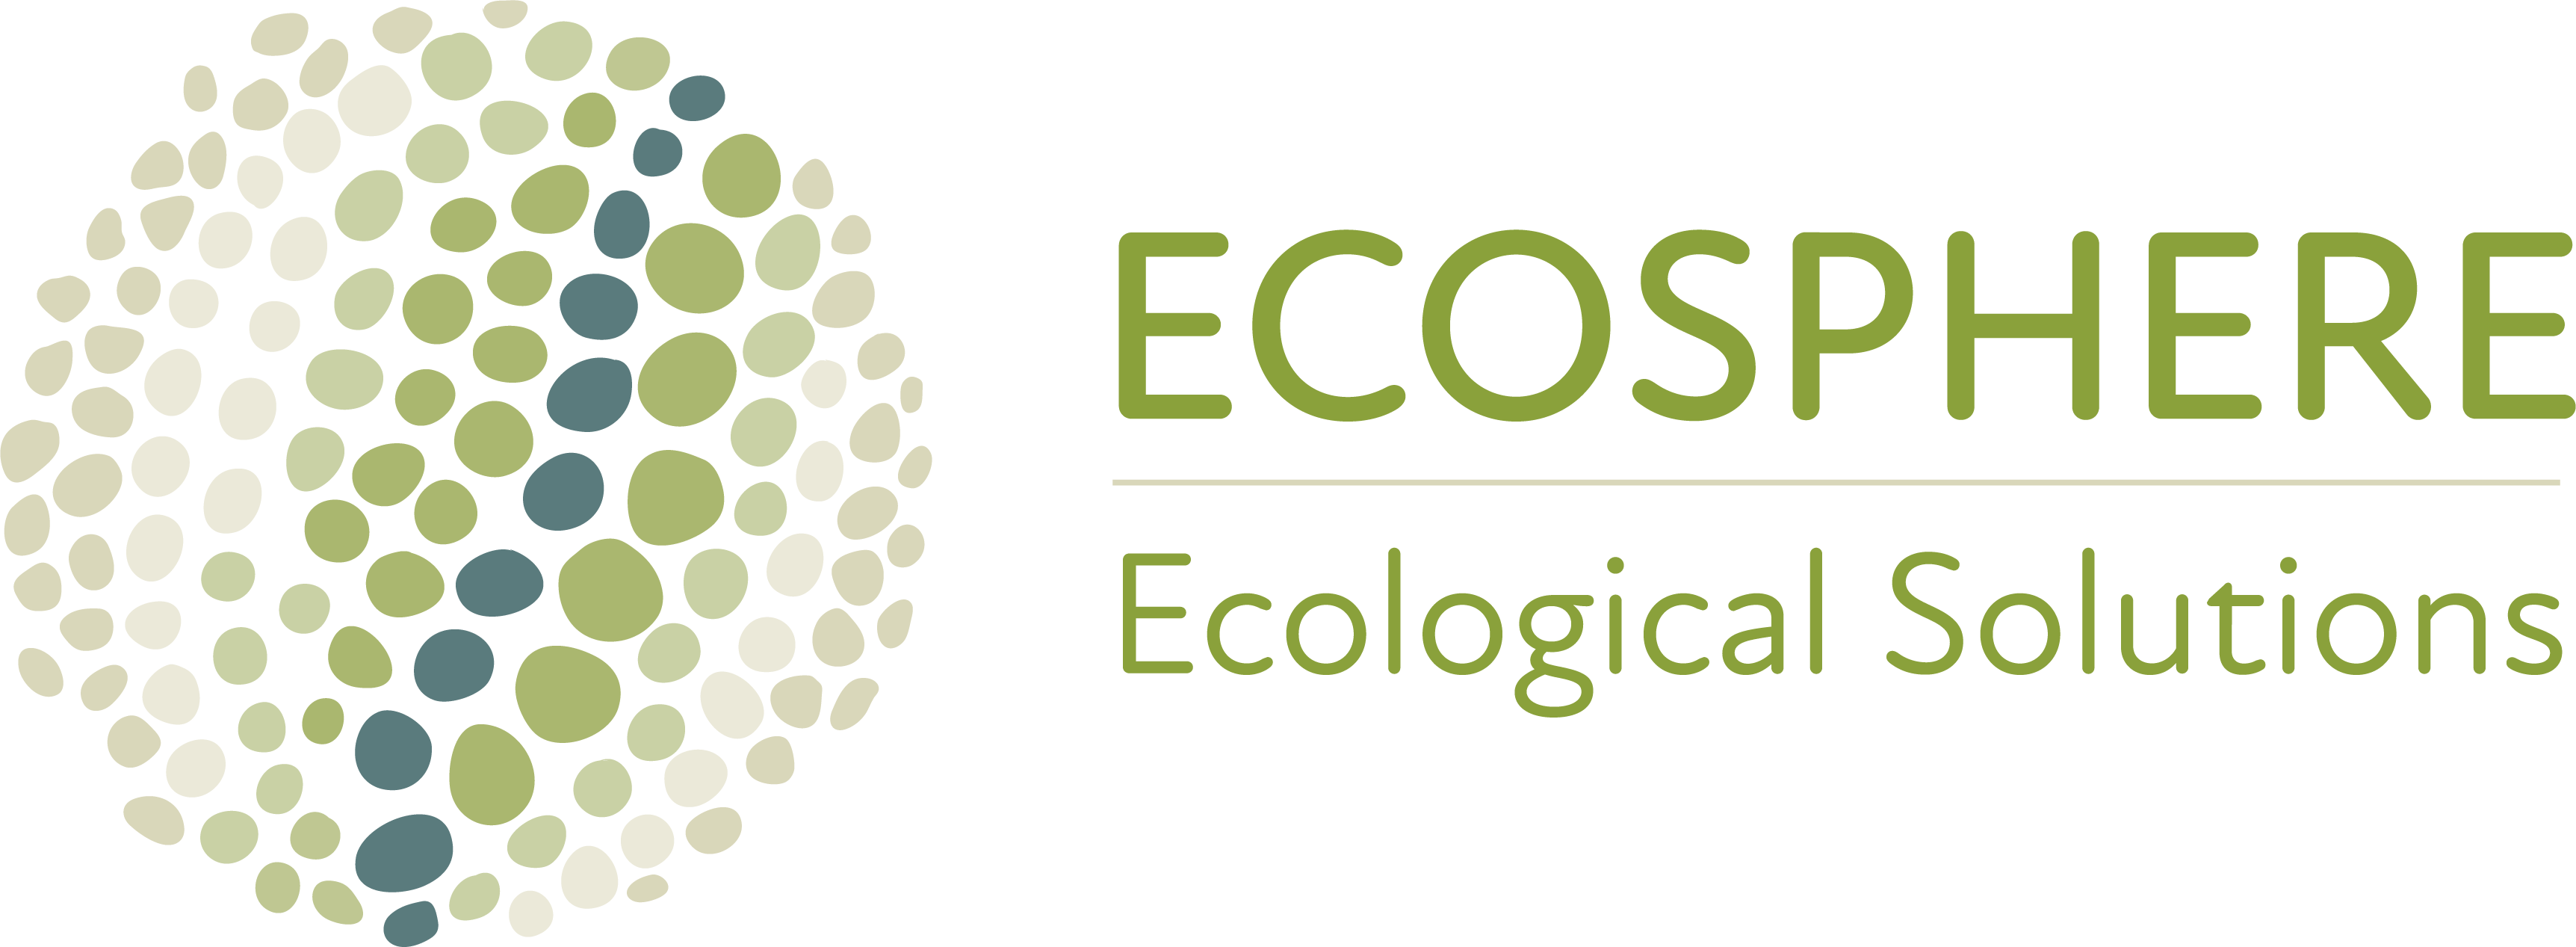 Ecosphere Ecological Solutions logo